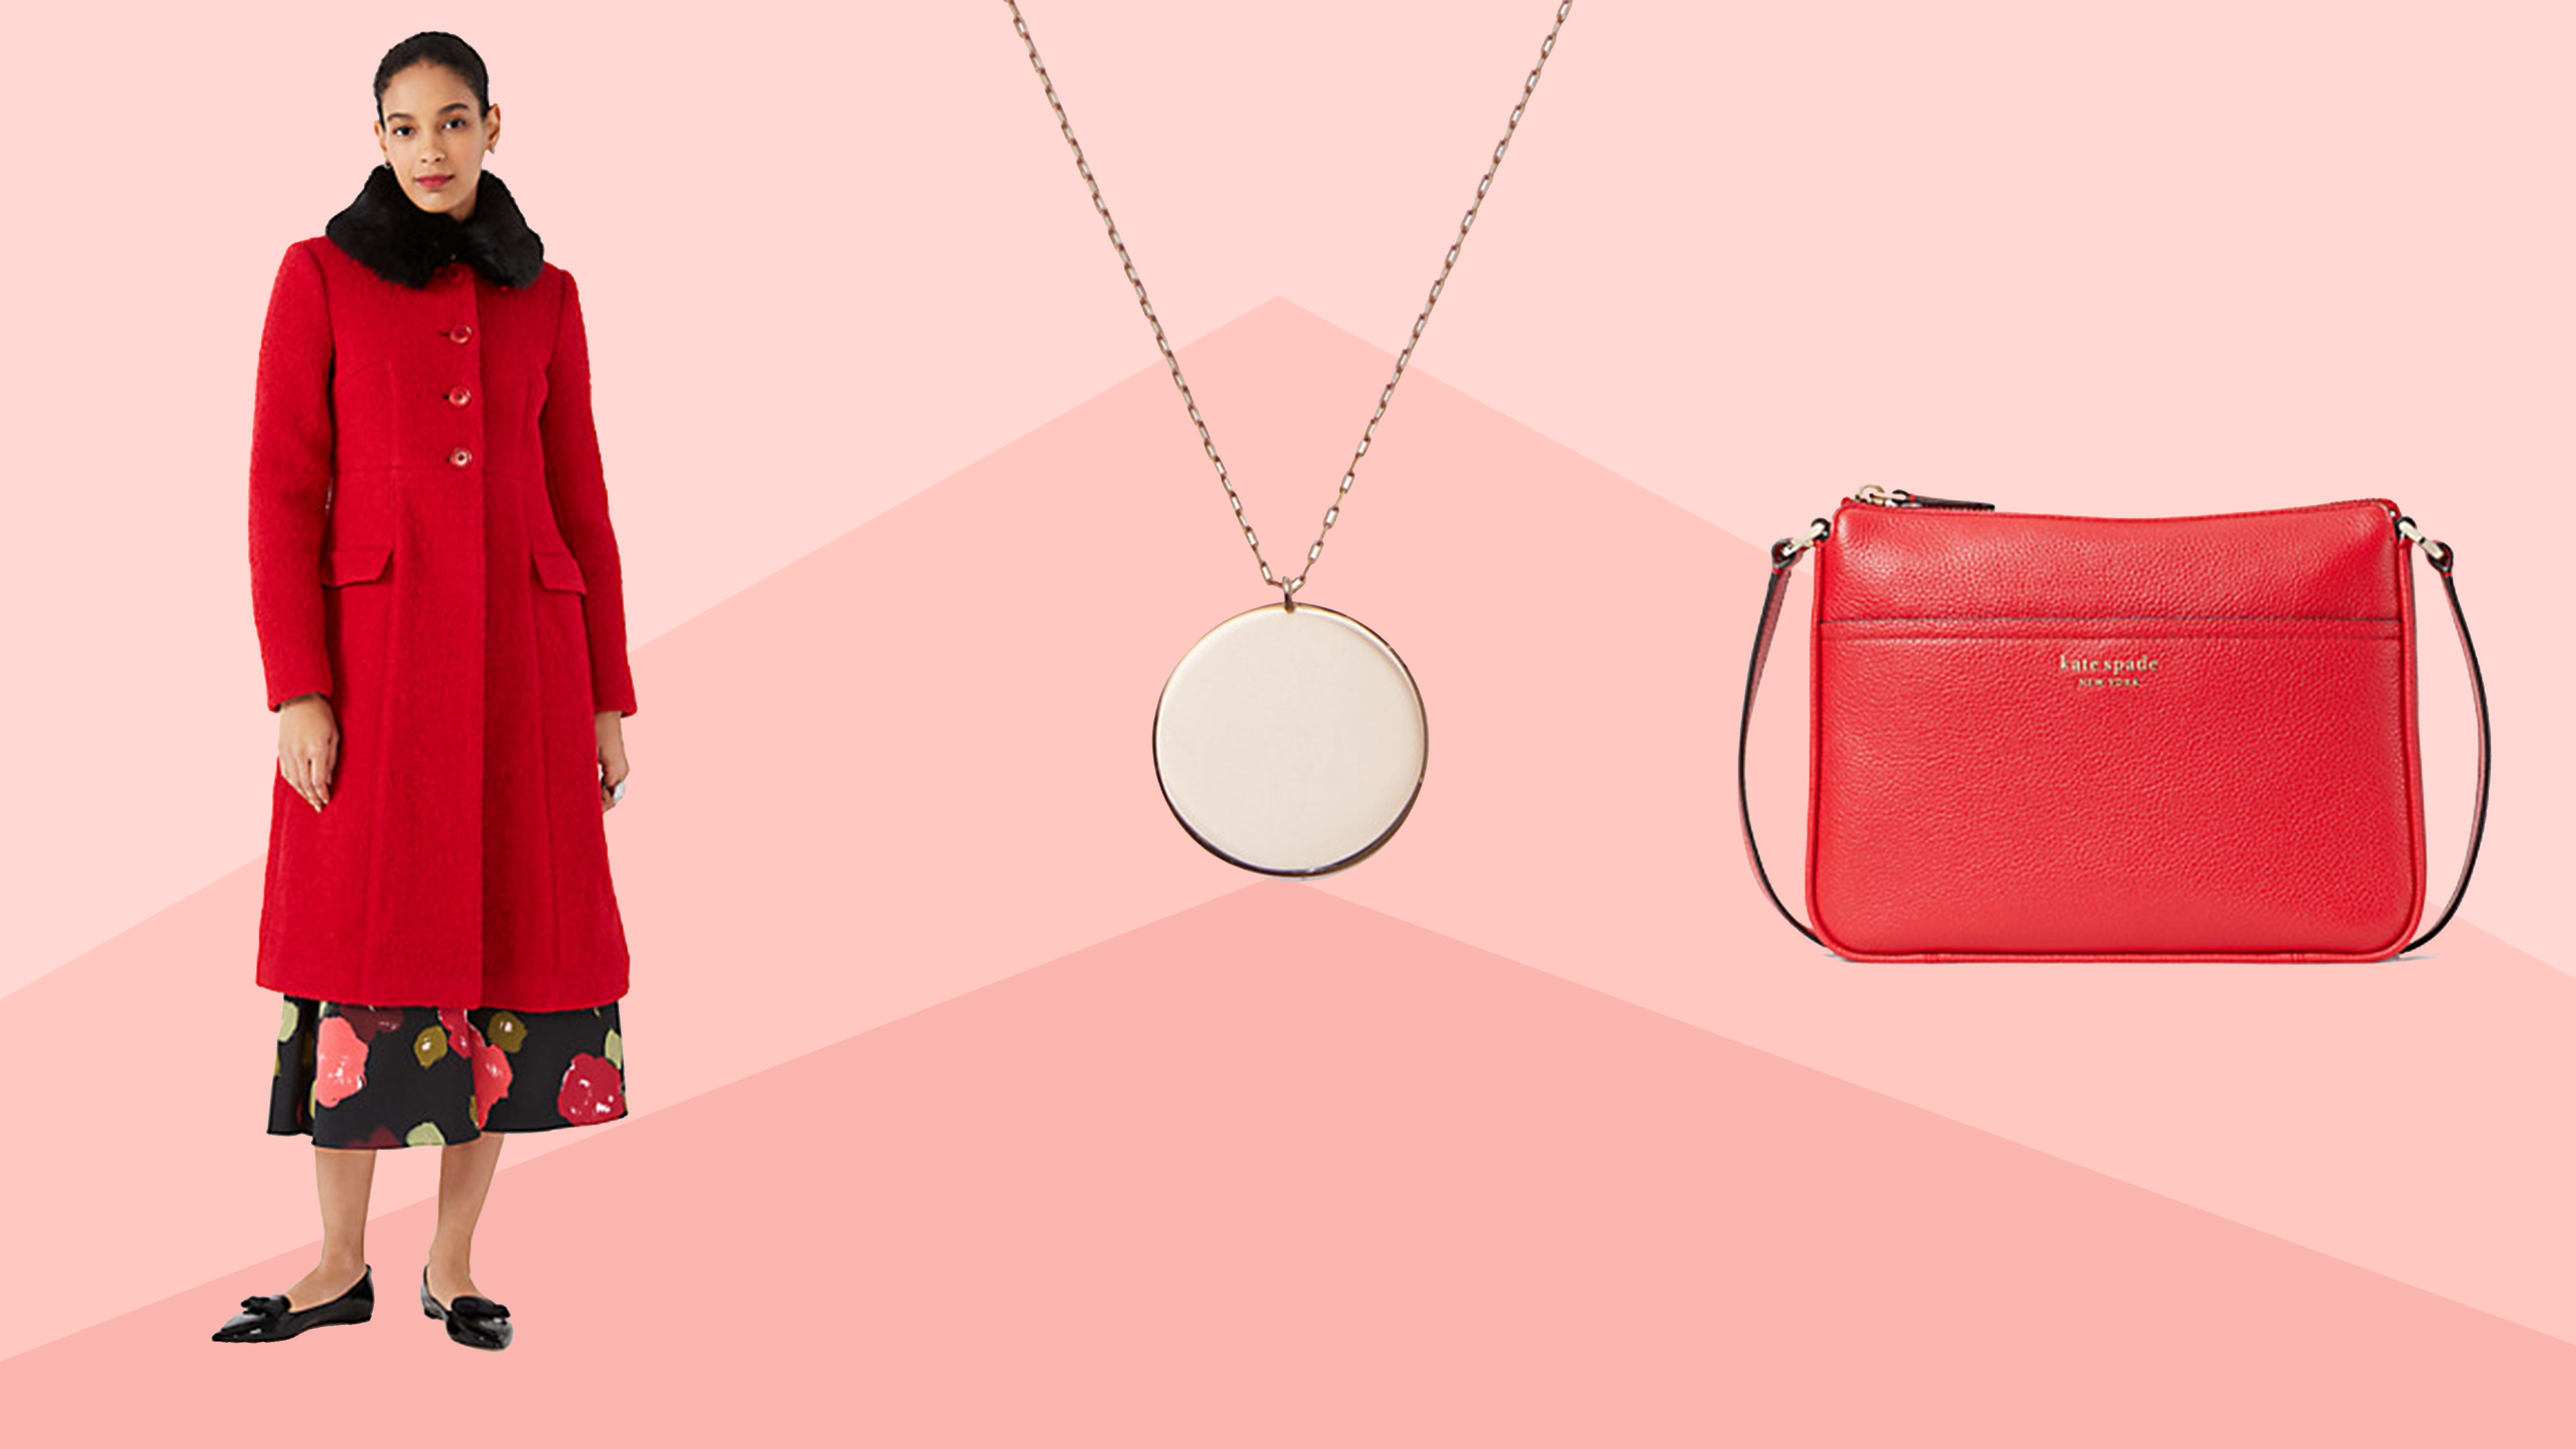 Save hundreds on Kate Spade purses ahead of Valentine's Day